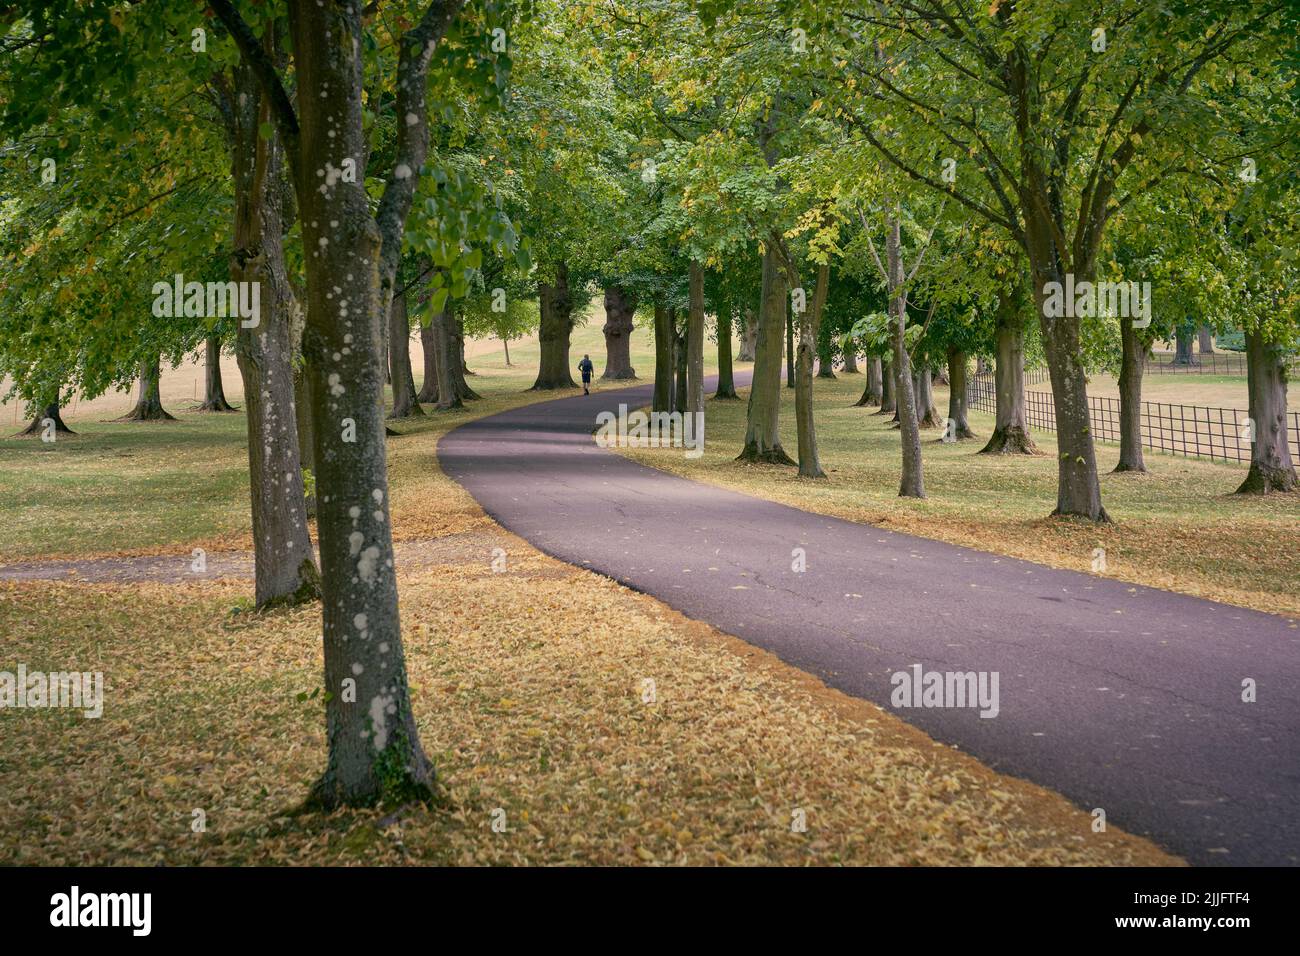 A lane passing through trees in autumn with person walking Stock Photo